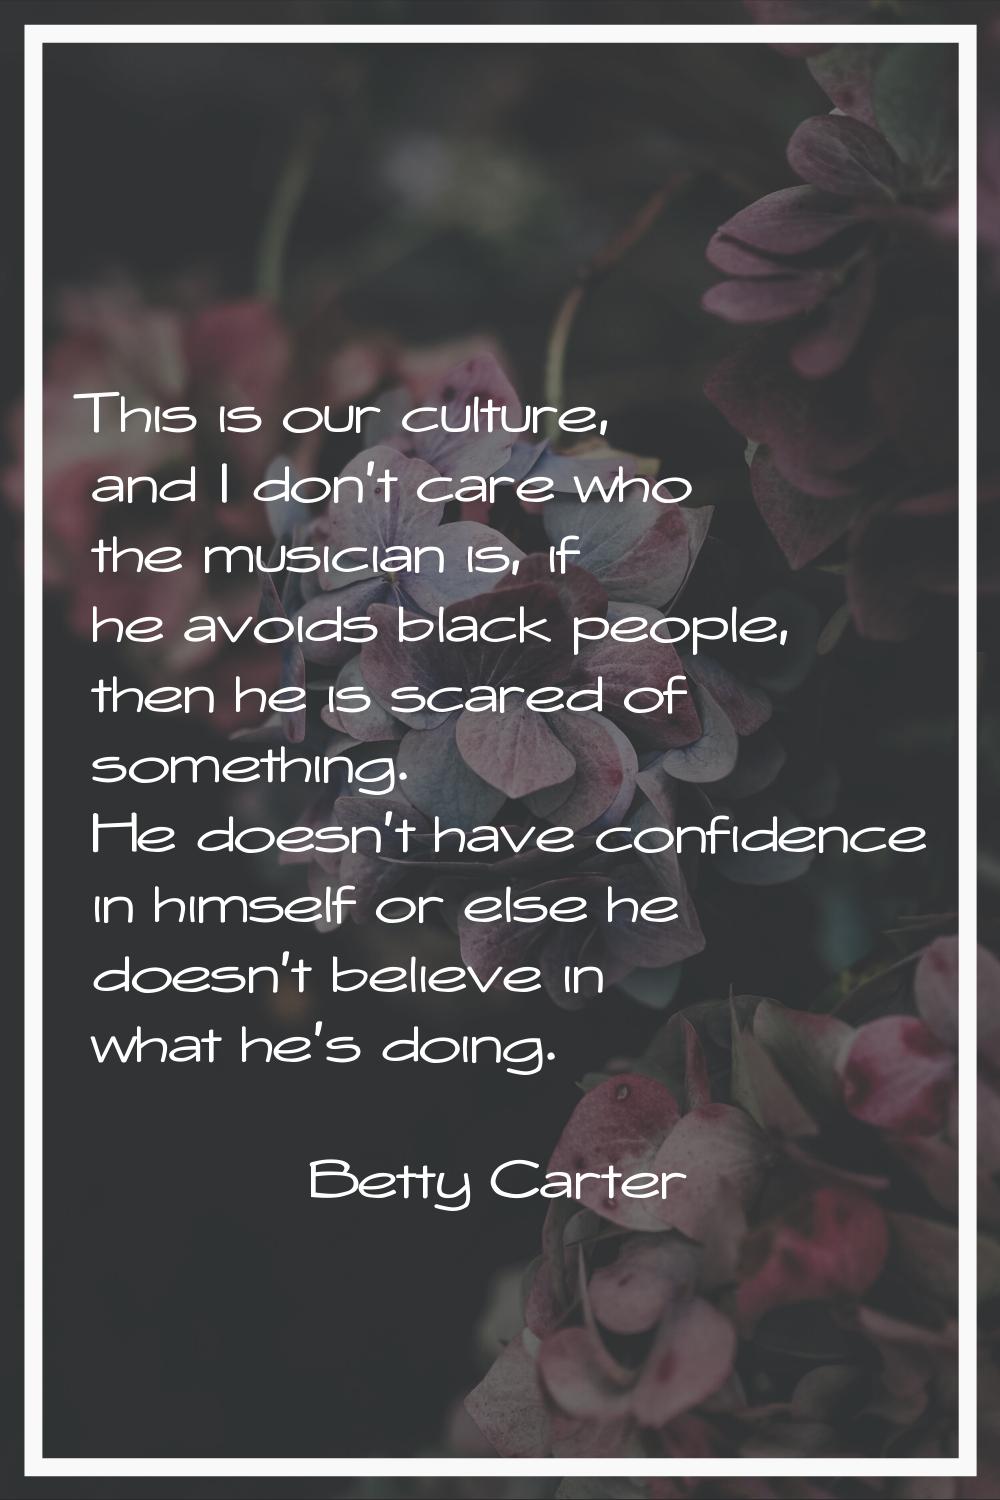 This is our culture, and I don't care who the musician is, if he avoids black people, then he is sc